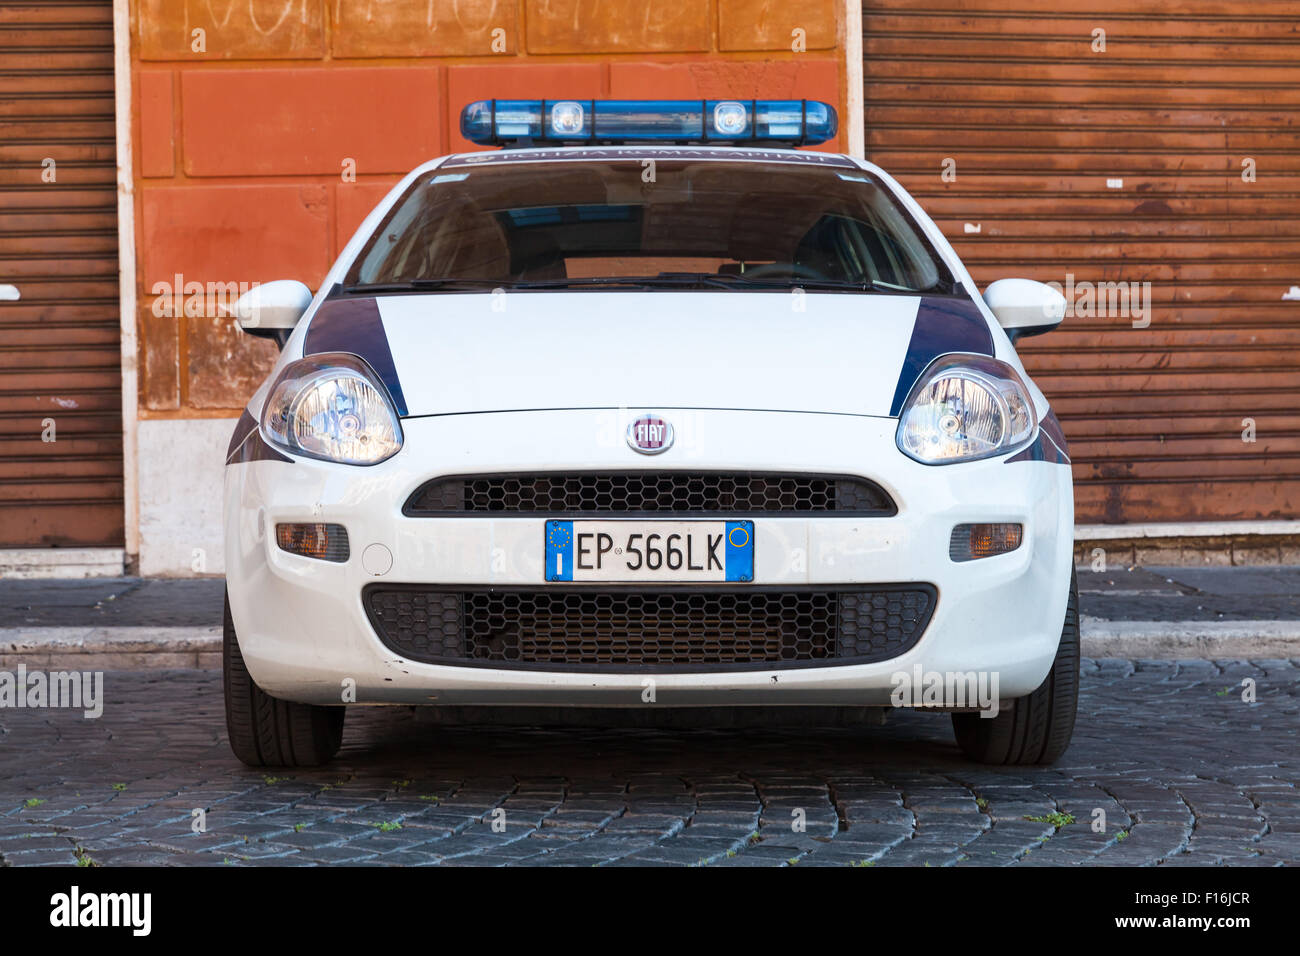 Rome, Italy - August 8, 2015: White Fiat Fiat Grande Punto police car stands parked on the city roadside, front view Stock Photo